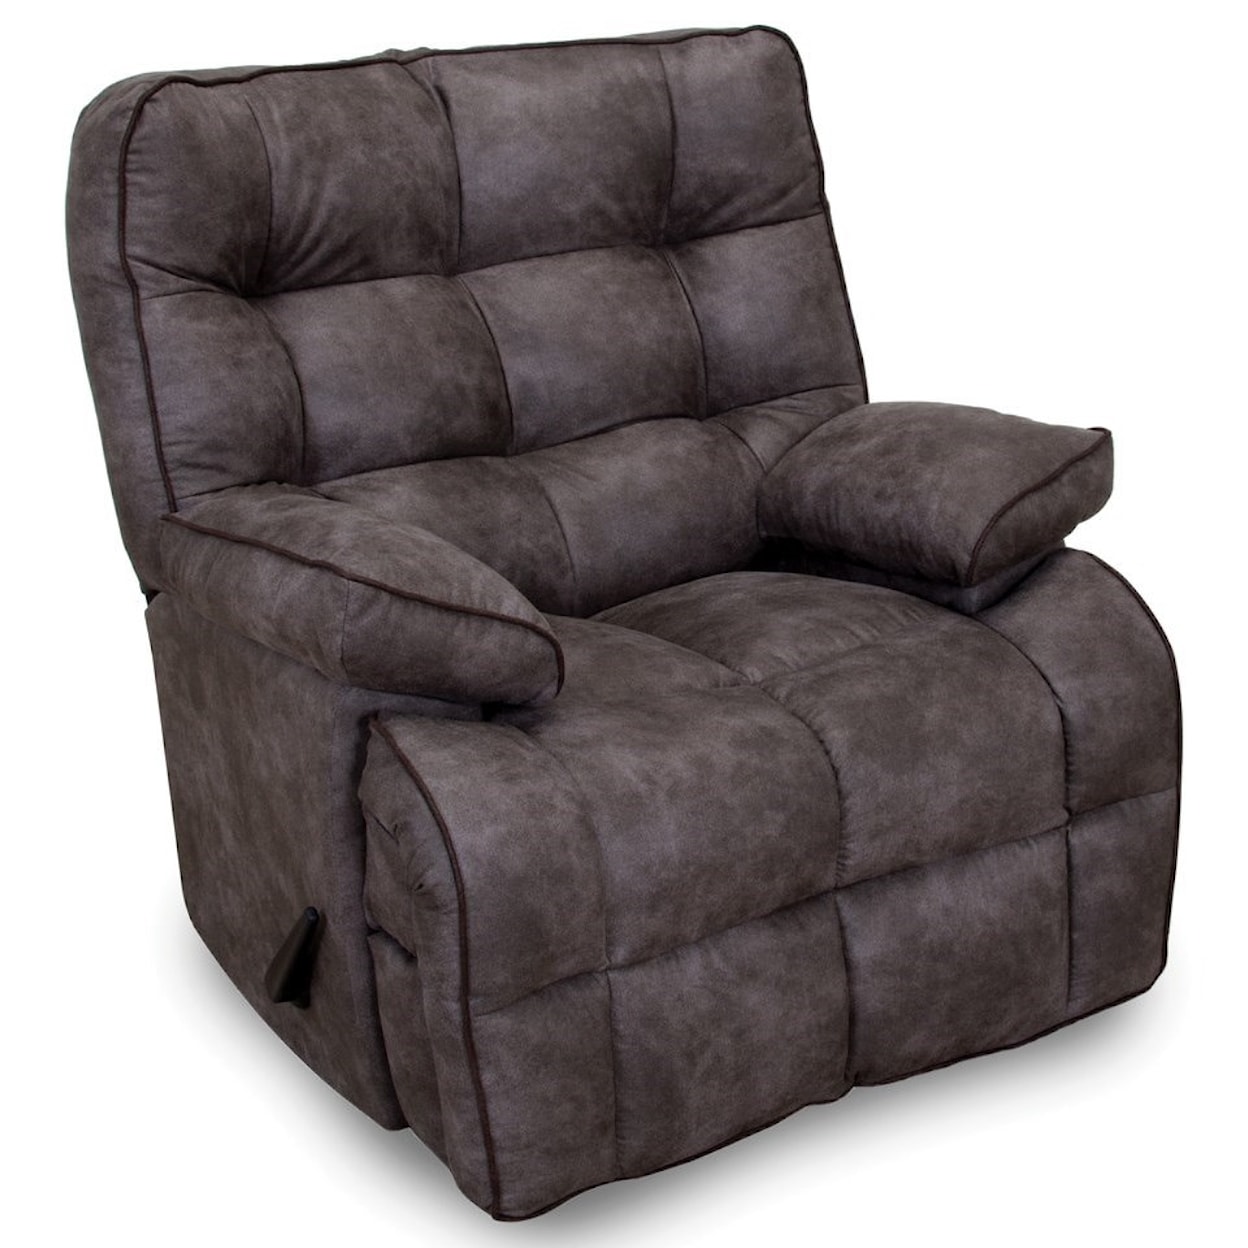 Franklin Venture Power Lay Flat Recliner with USB Port